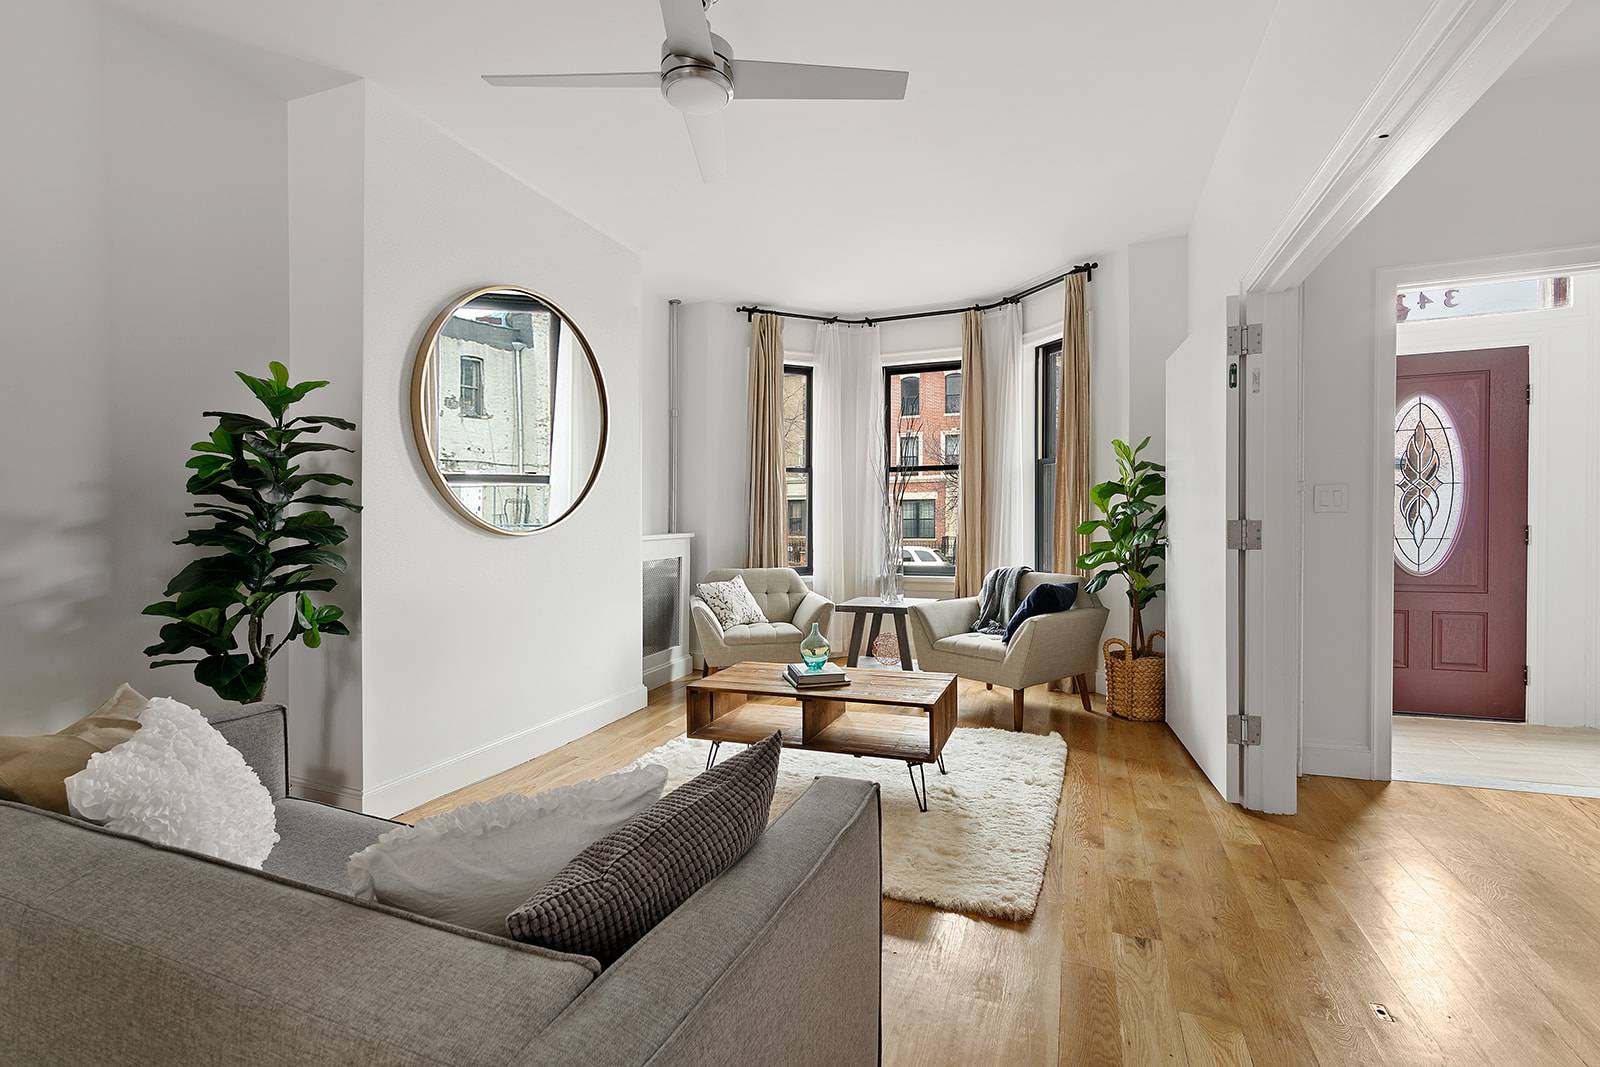 Beautifully renovated townhouse with a private garden located in the charming neighborhood of Prospect Lefferts Gardens, Brooklyn.